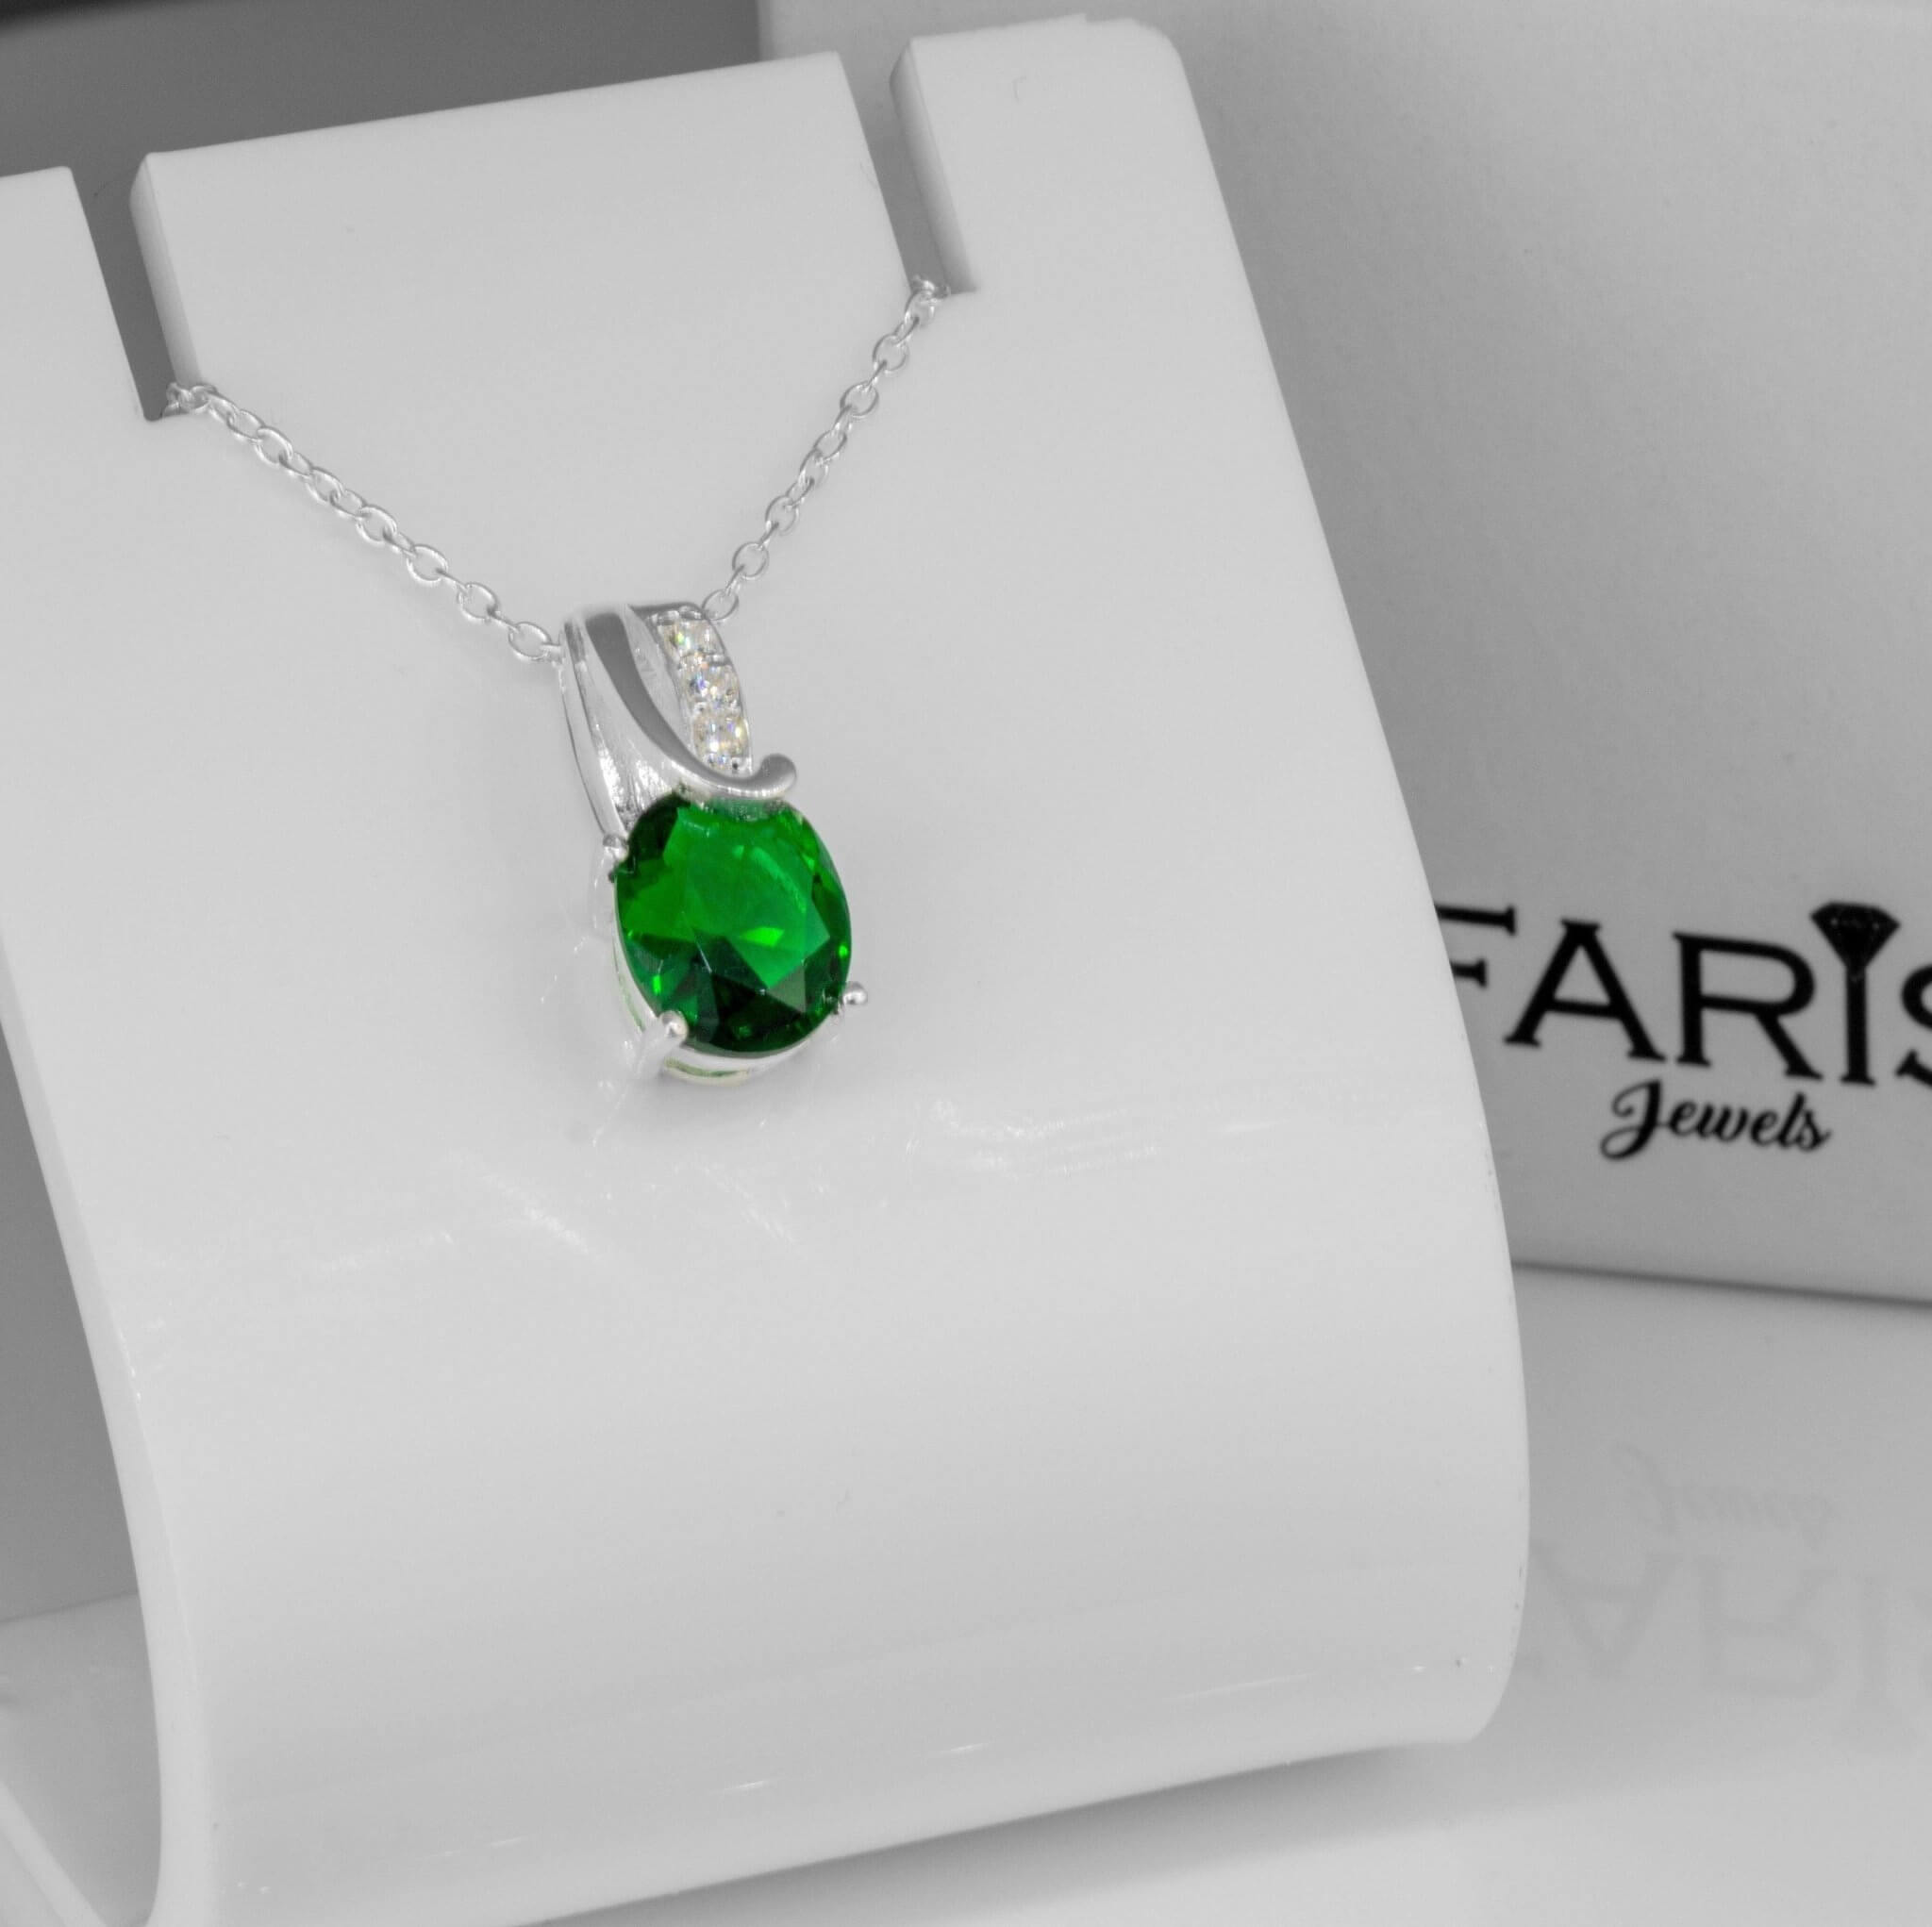 925 Sterling Silver Cubic Zirconia CZ & Green Emerald Ladies Pendant Necklace Jewellery Gift Boxed Man-made Diamond Gemstone Jewelry